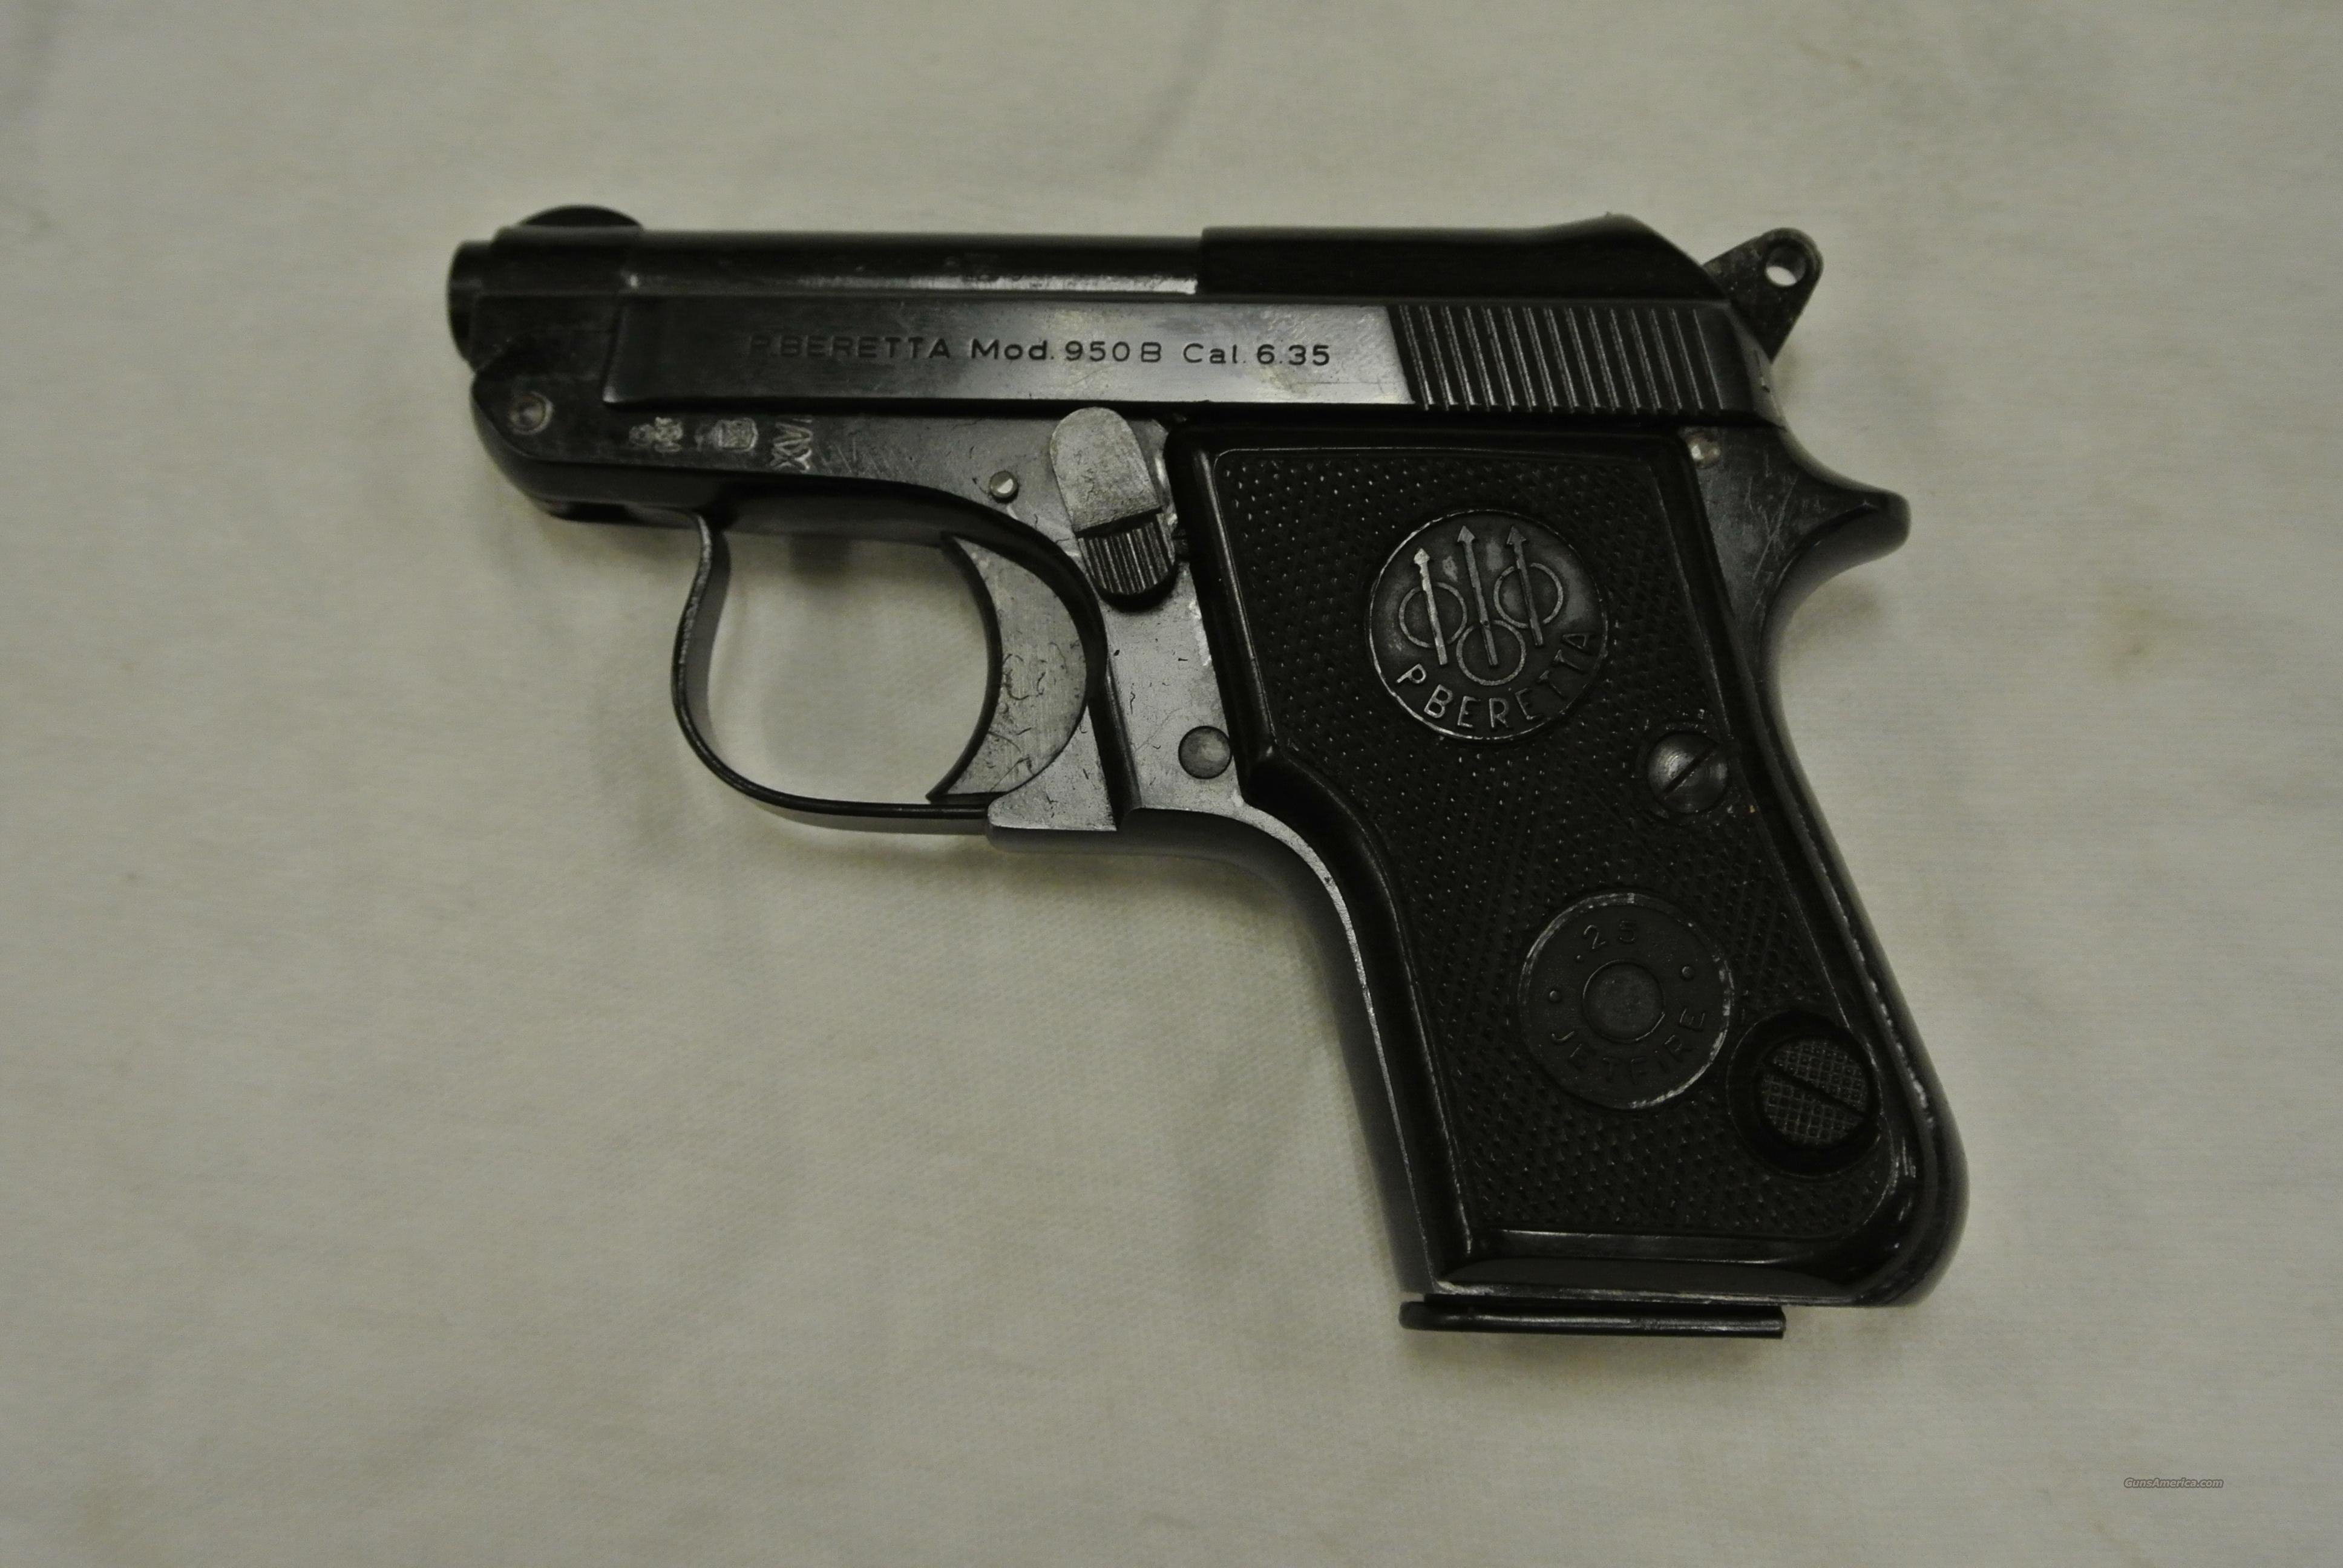 Beretta Pistol Pics, Weapons Collection